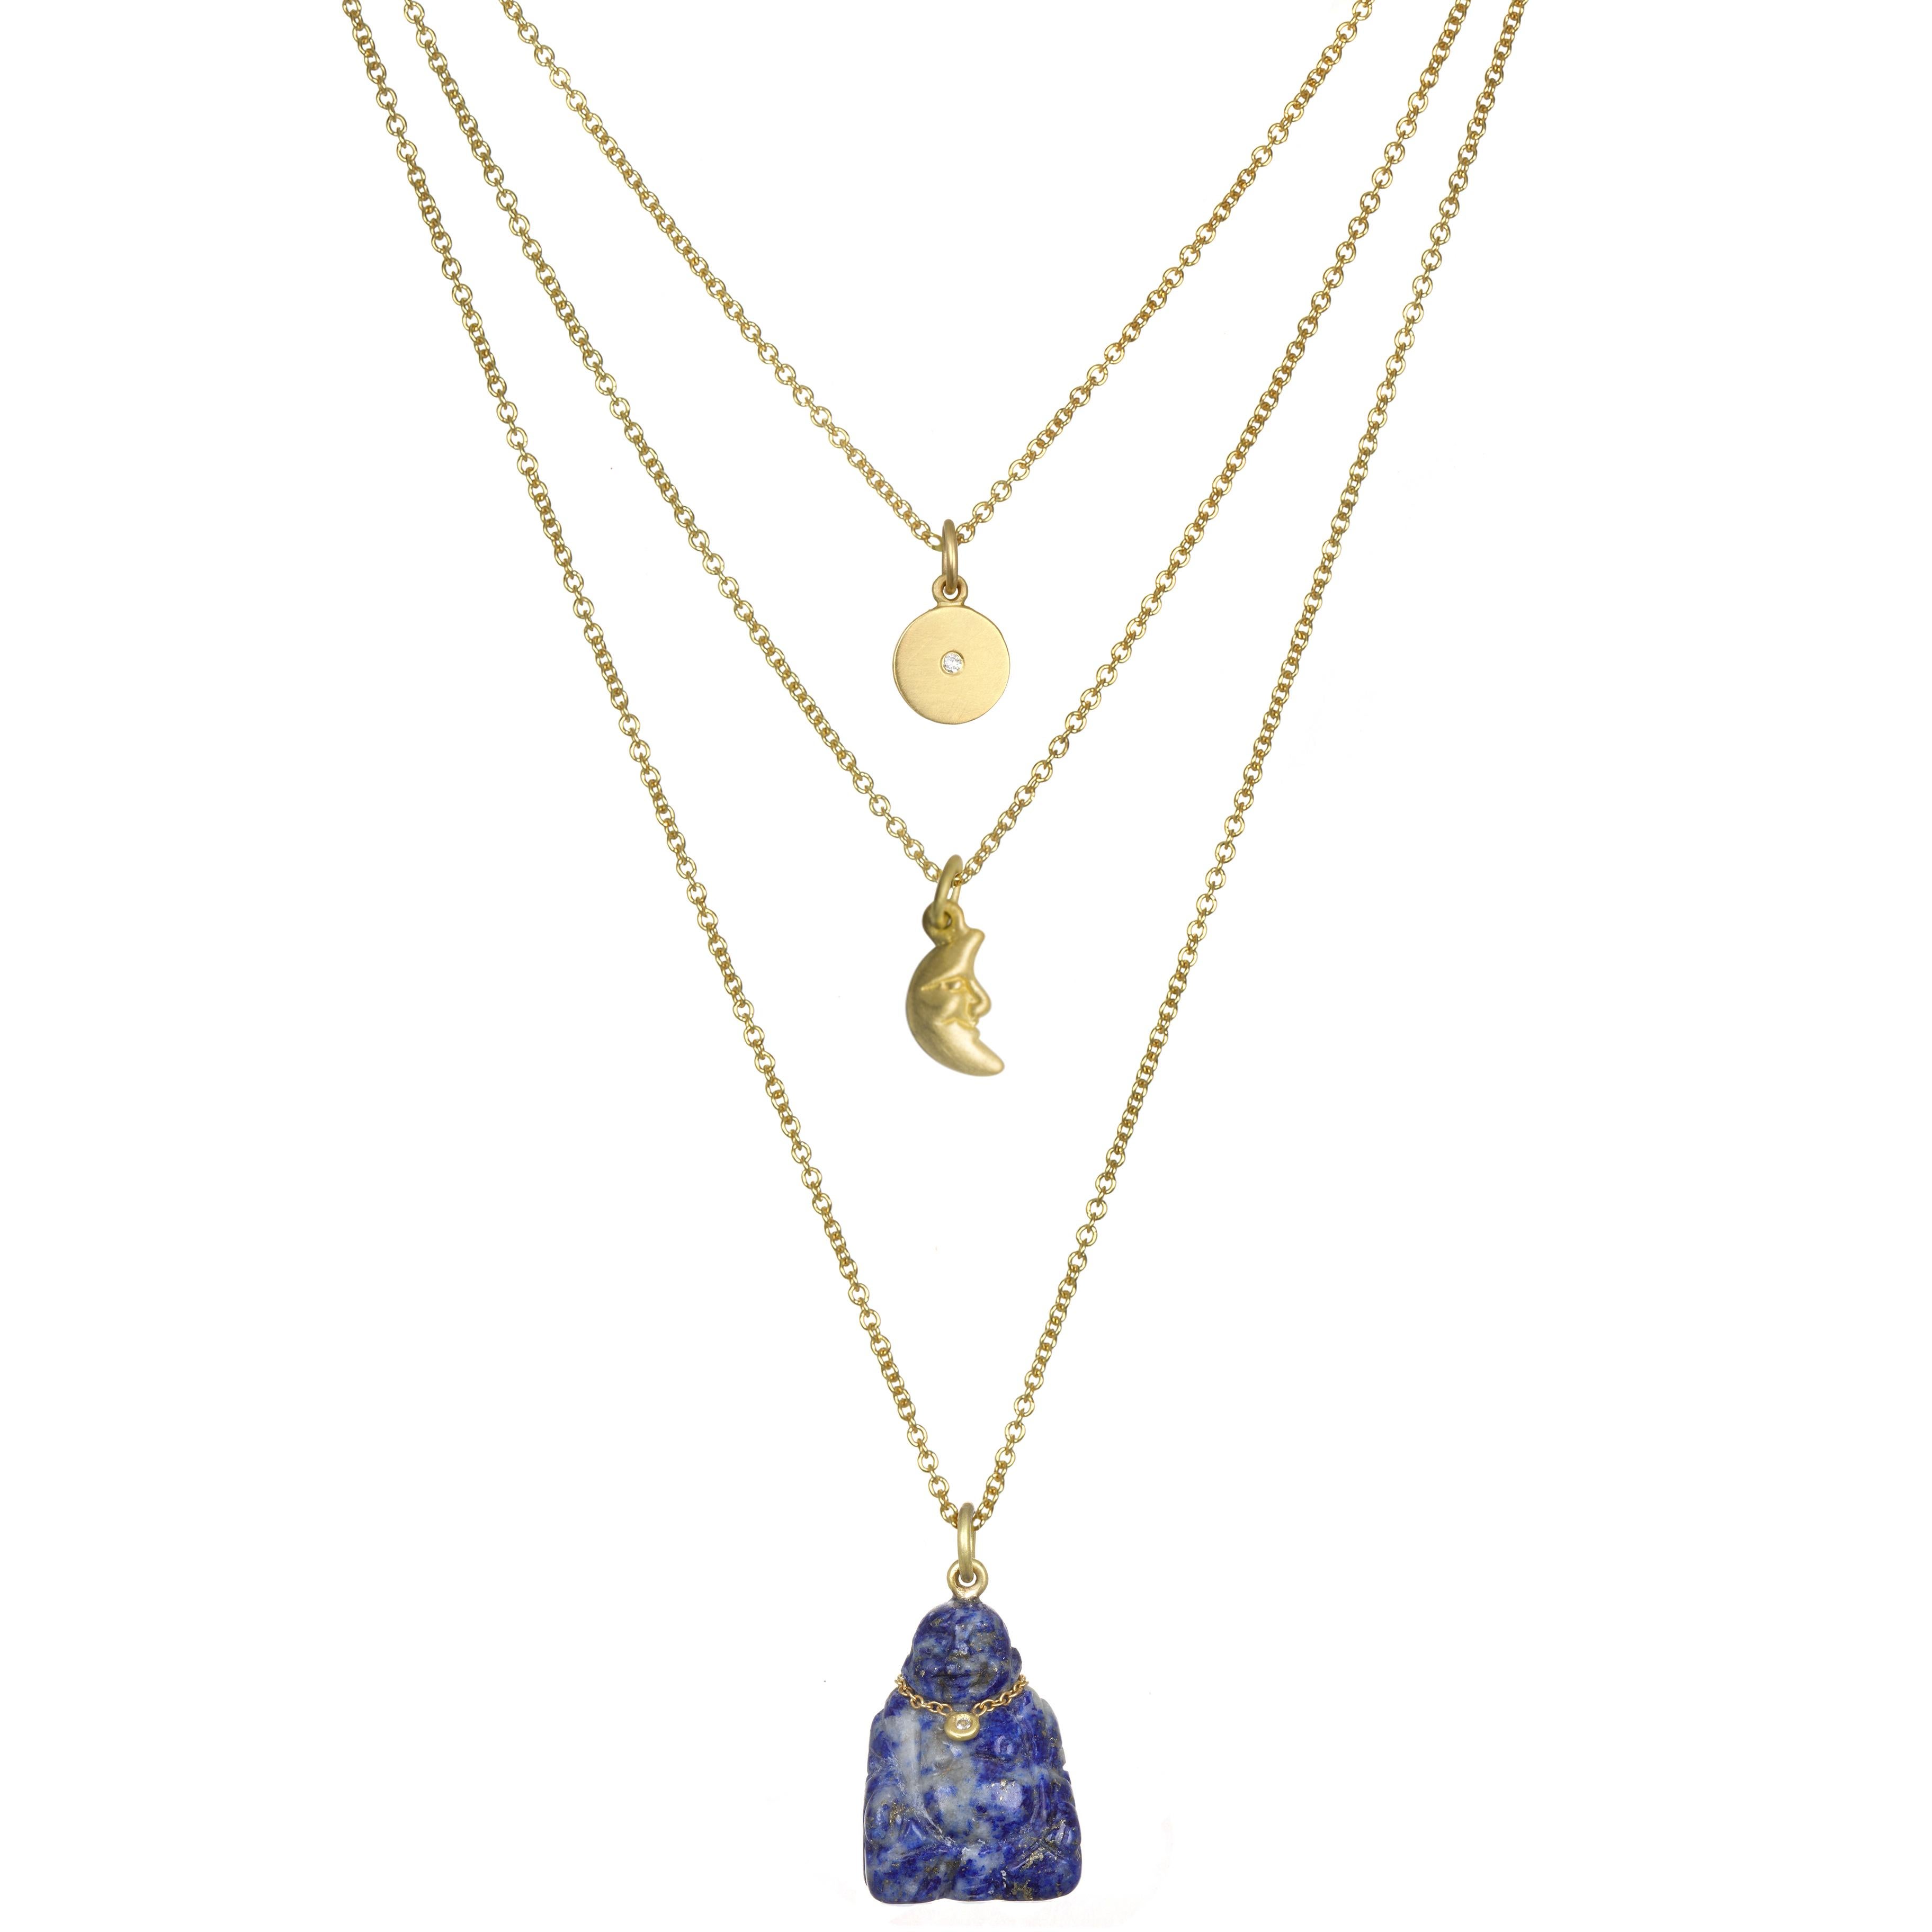 A symbol of longevity, enlightenment and love our Lapis buddha pendant is complete with its very own diamond necklace. It is sure to add a distinctive sparkle in your life! 

Length:  0.75